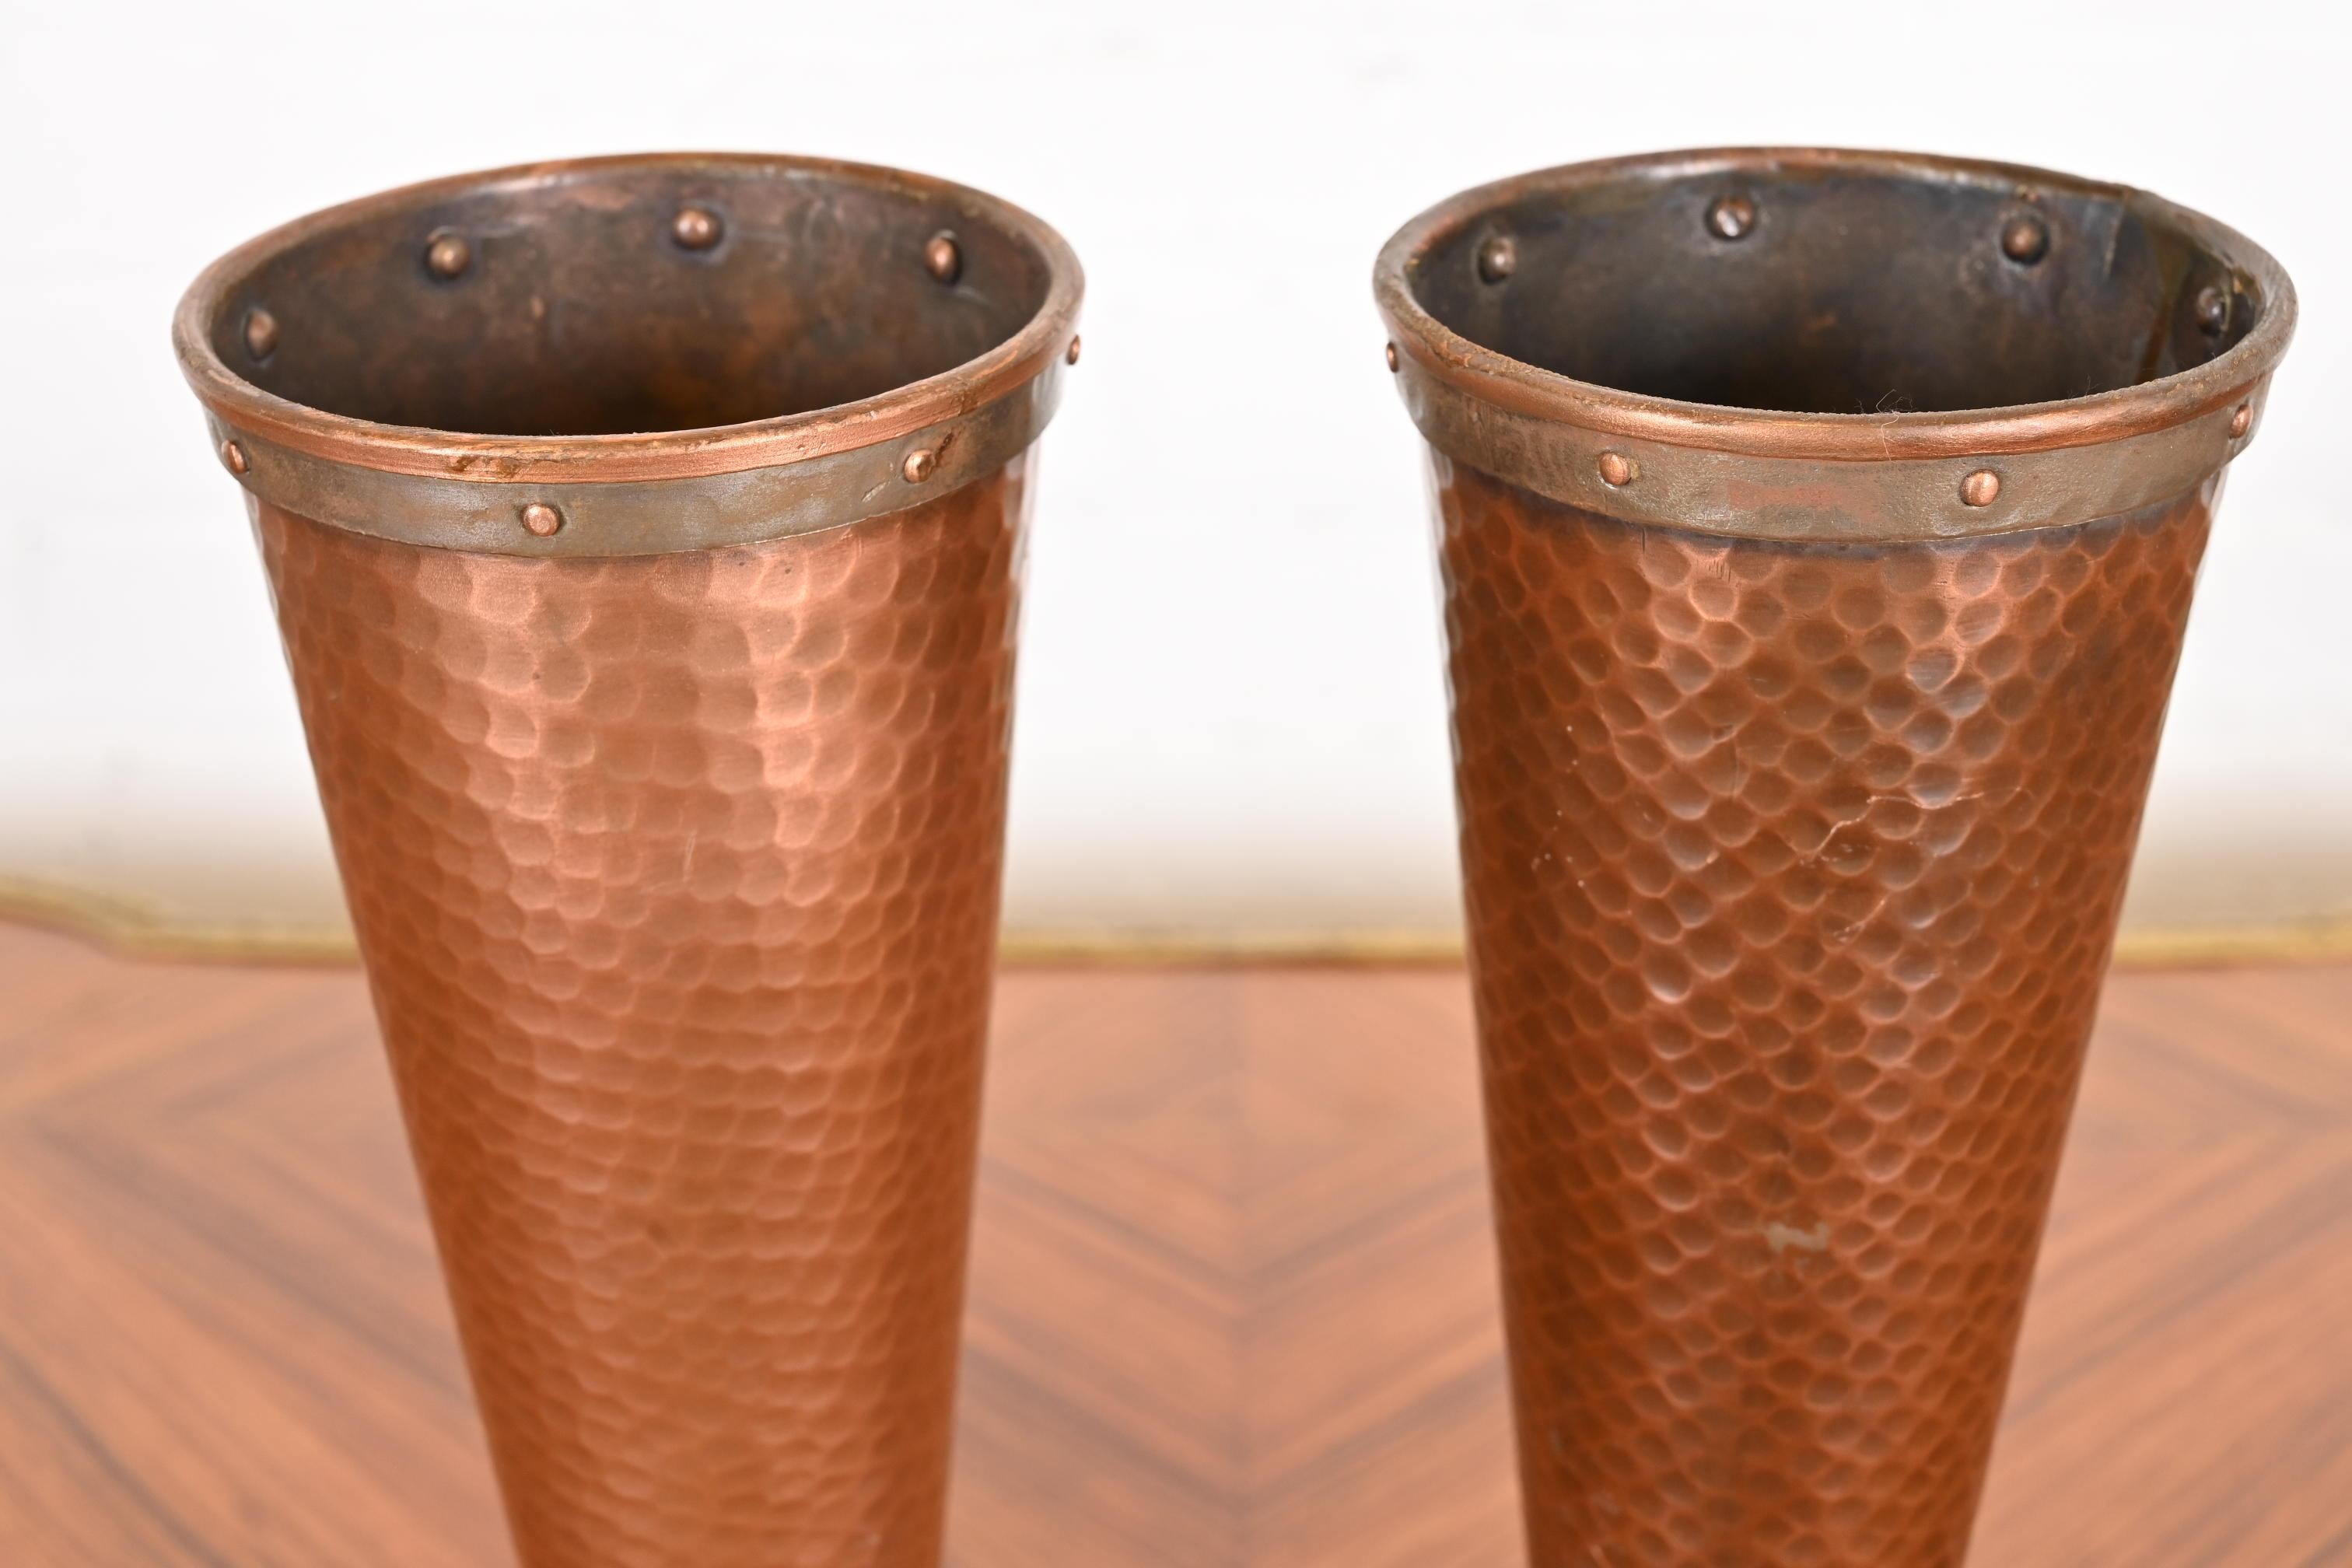 Joseph Heinrichs Style Arts and Crafts Hand-Hammered Copper Vases, Pair For Sale 4